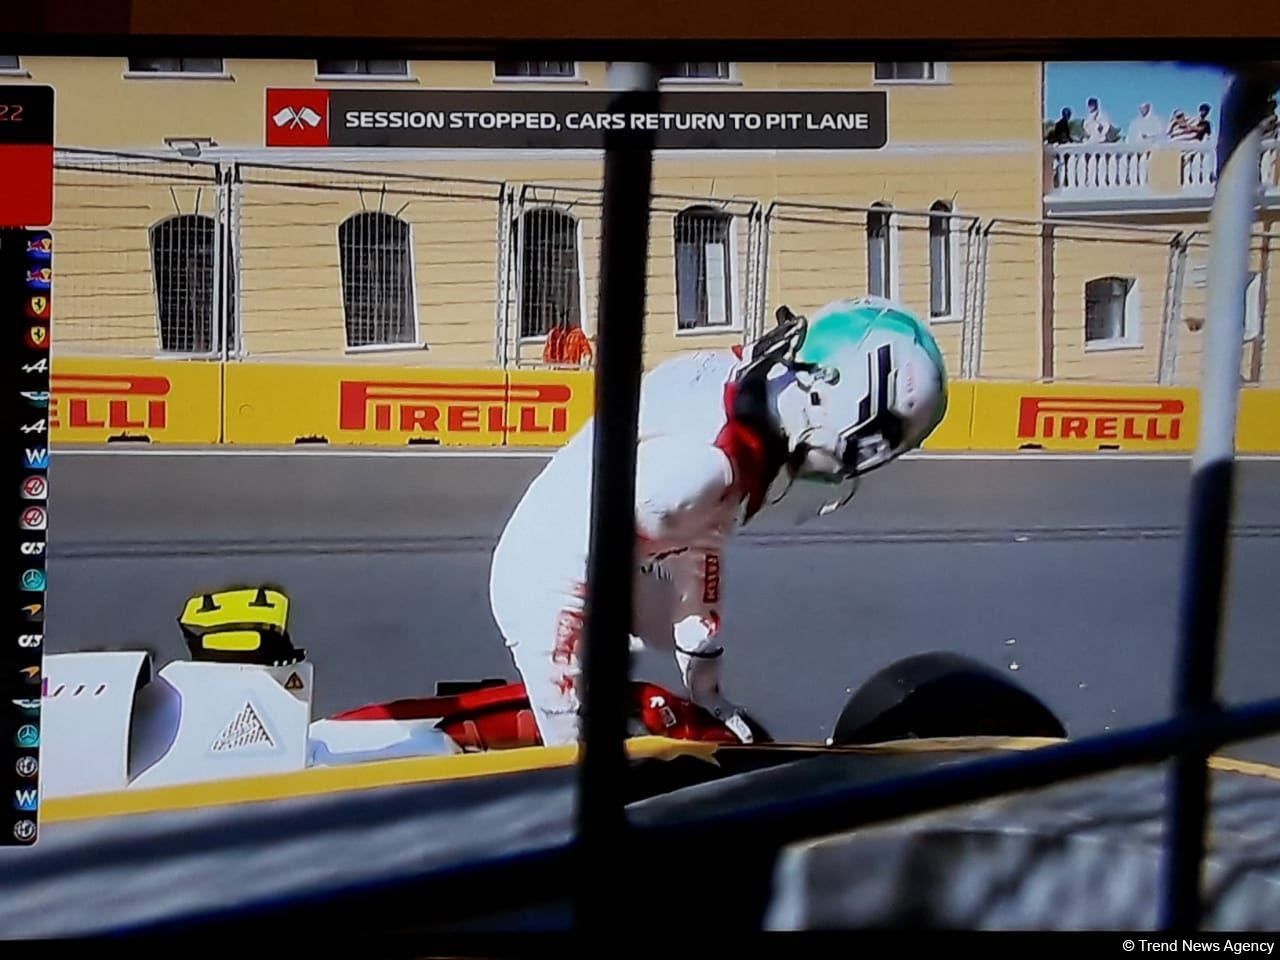 Another crash takes place at F-1 Qualifying Session of Azerbaijan Grand Prix (PHOTO)